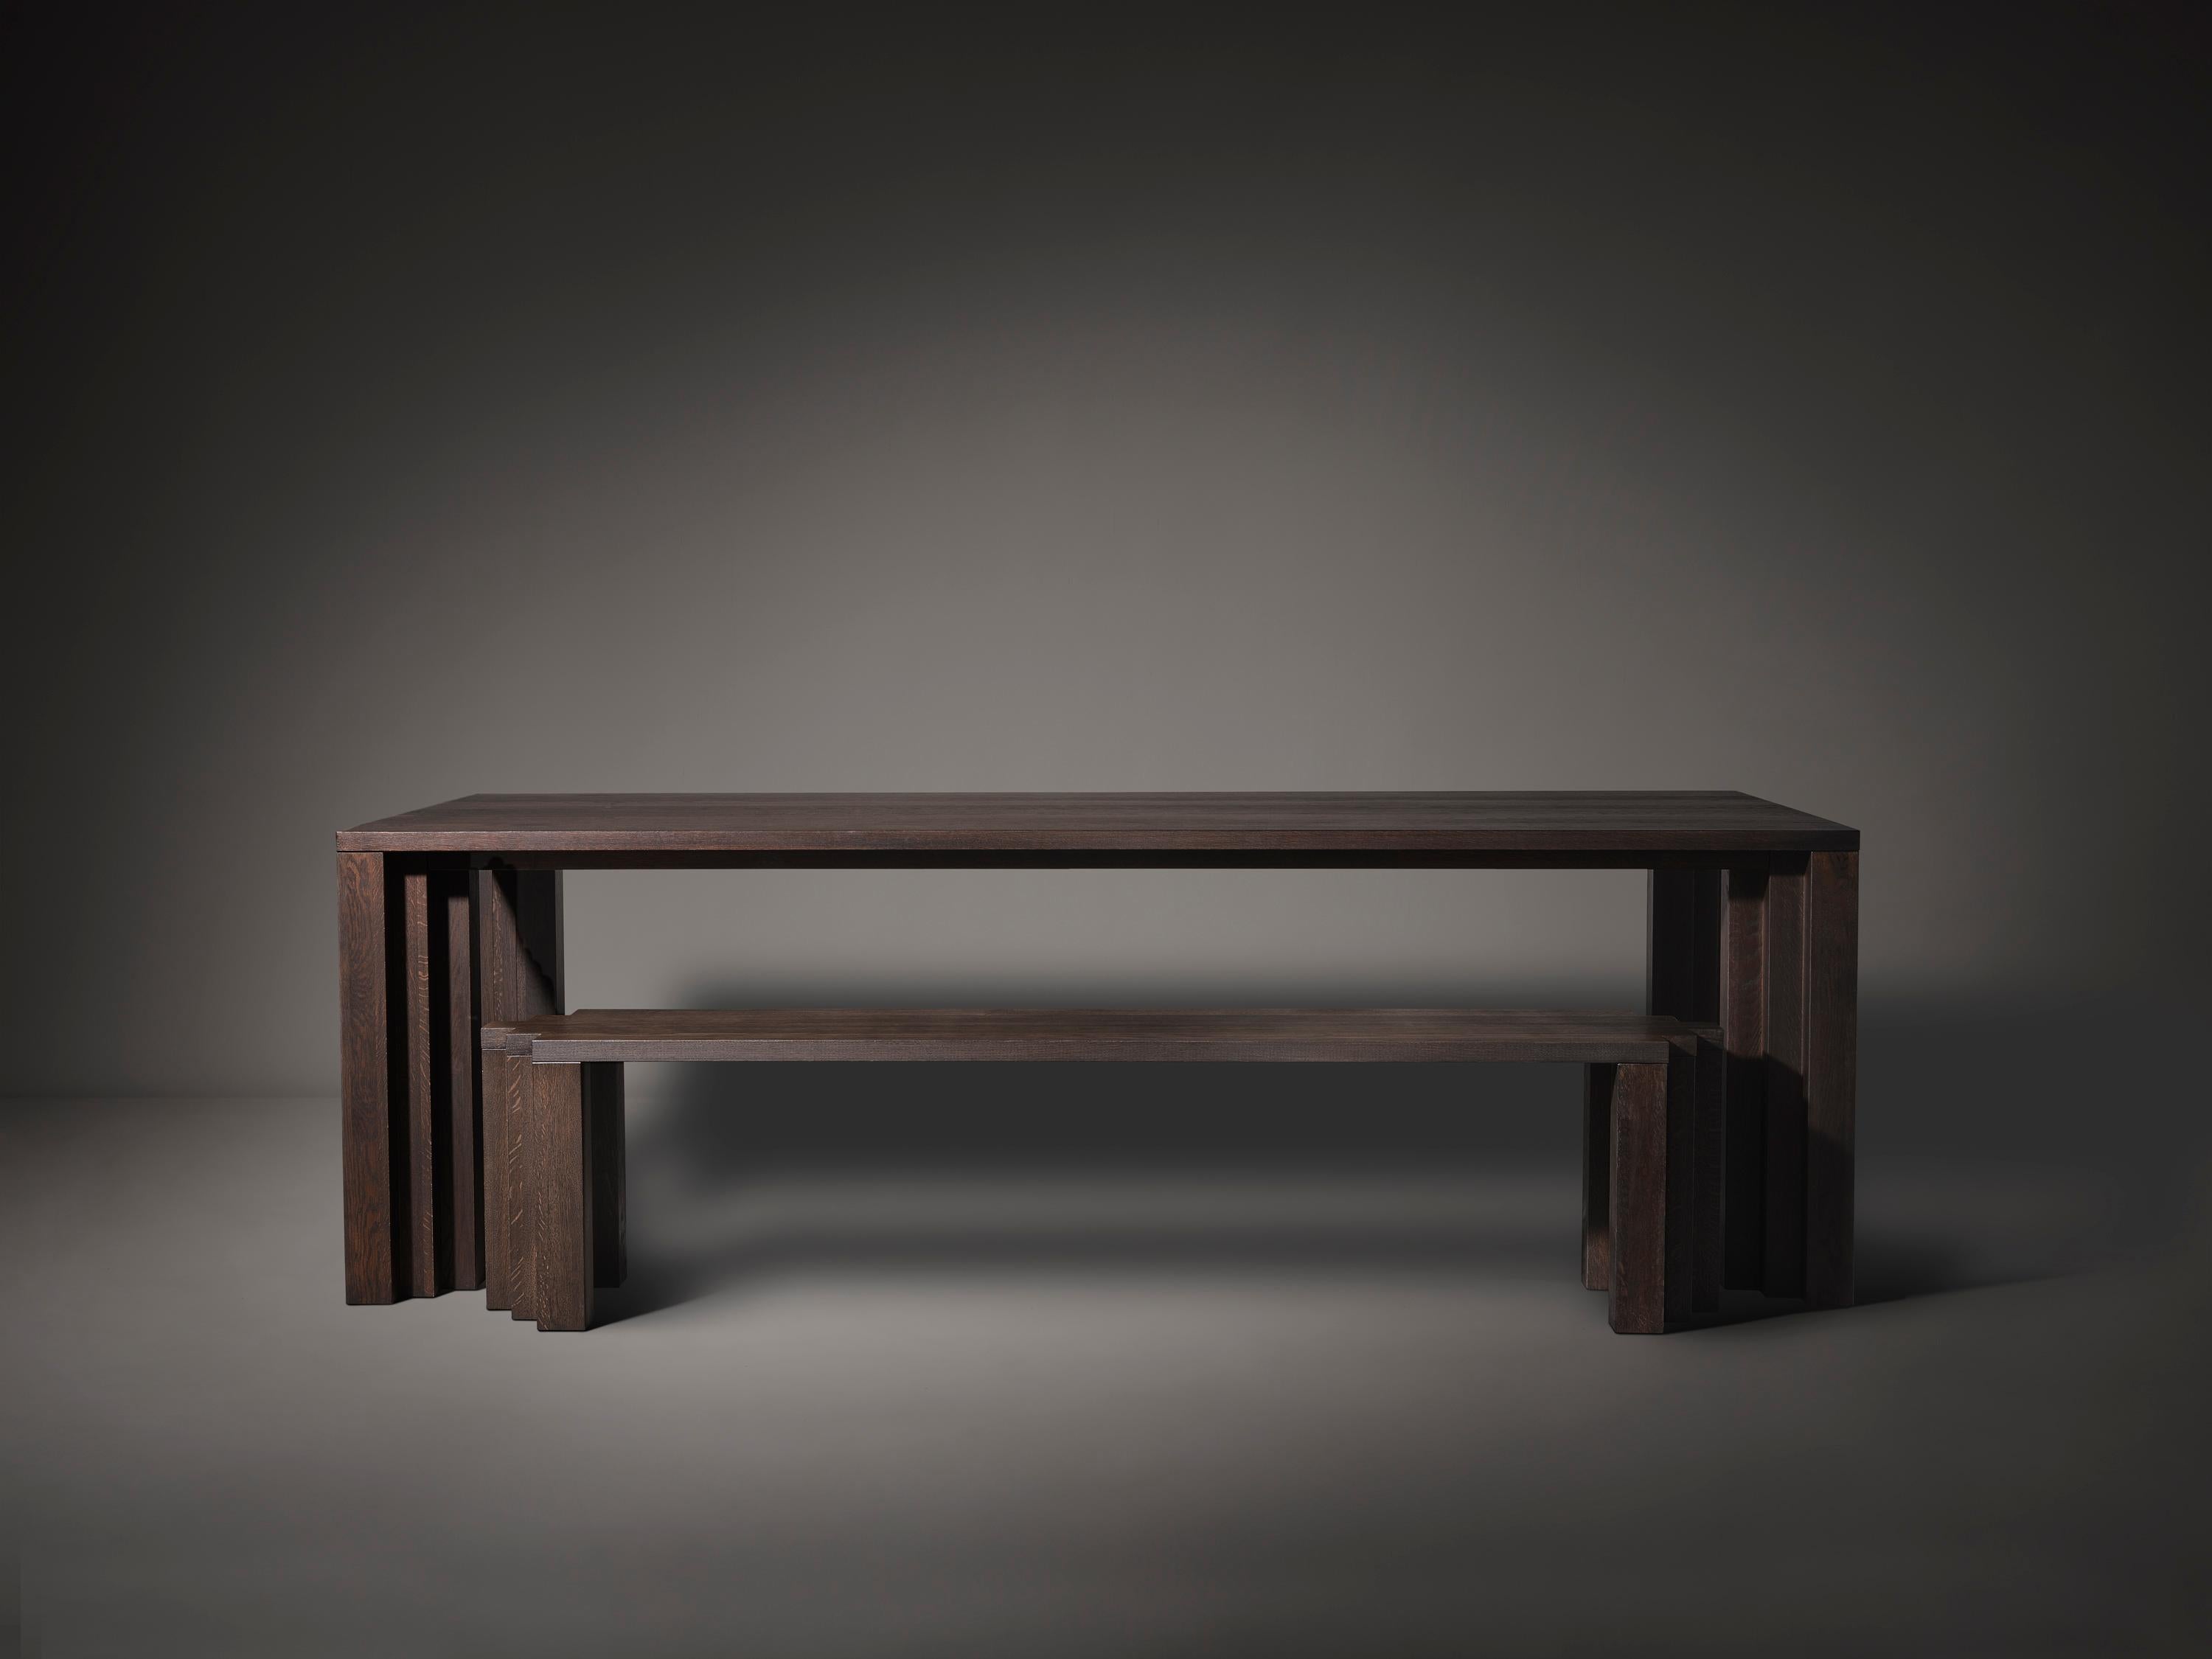 Modern Brutalist Solid Wooden Cadence Dining Table - Dark Brown In New Condition For Sale In Amsterdam, NL